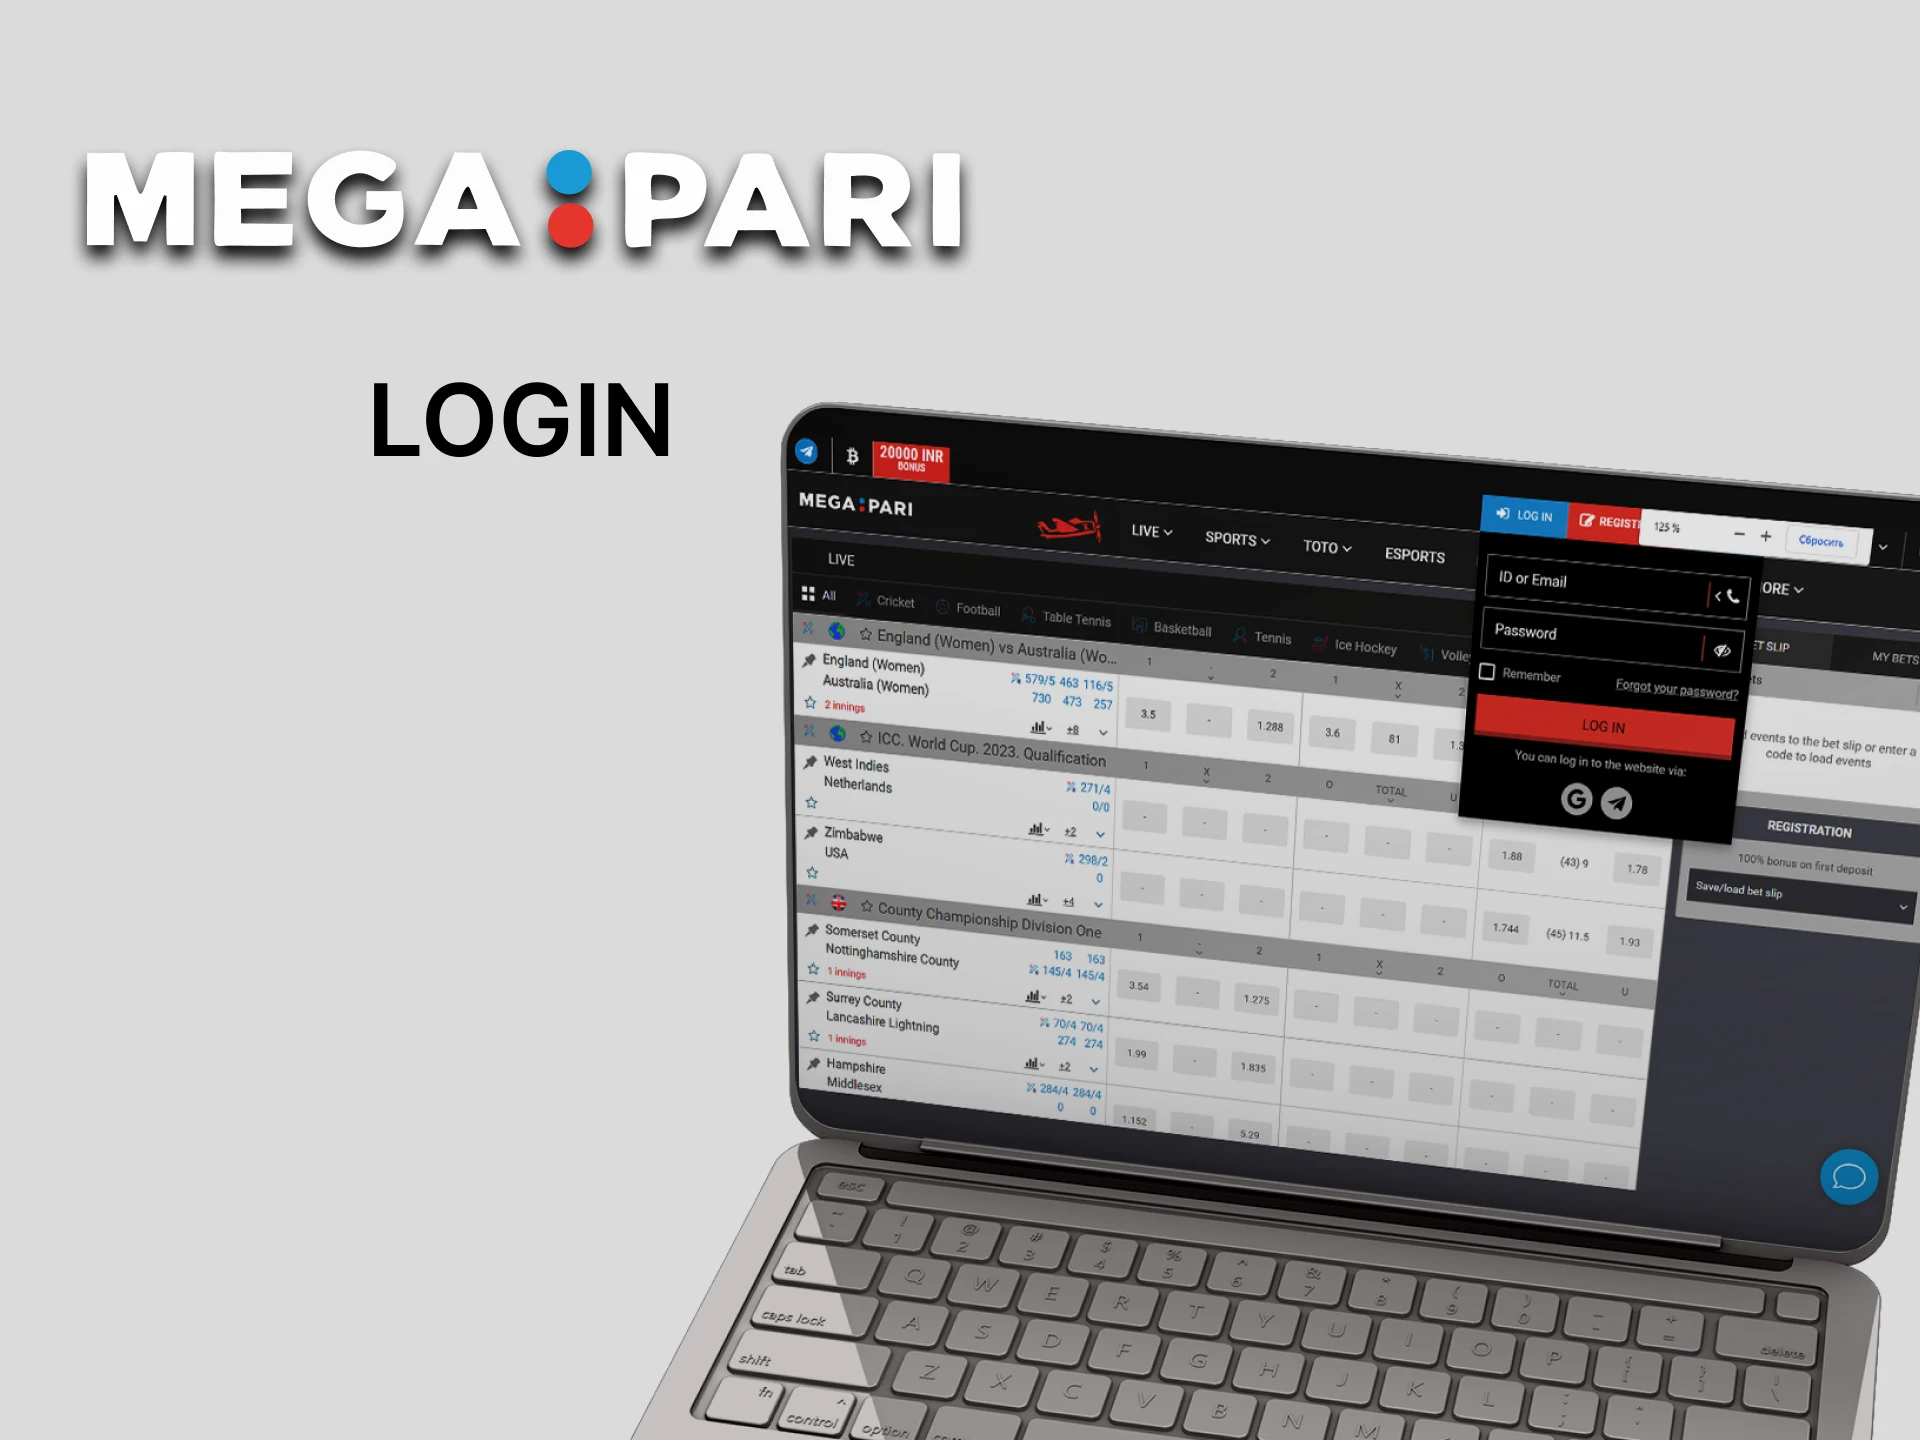 Log in to your personal Megapari account.